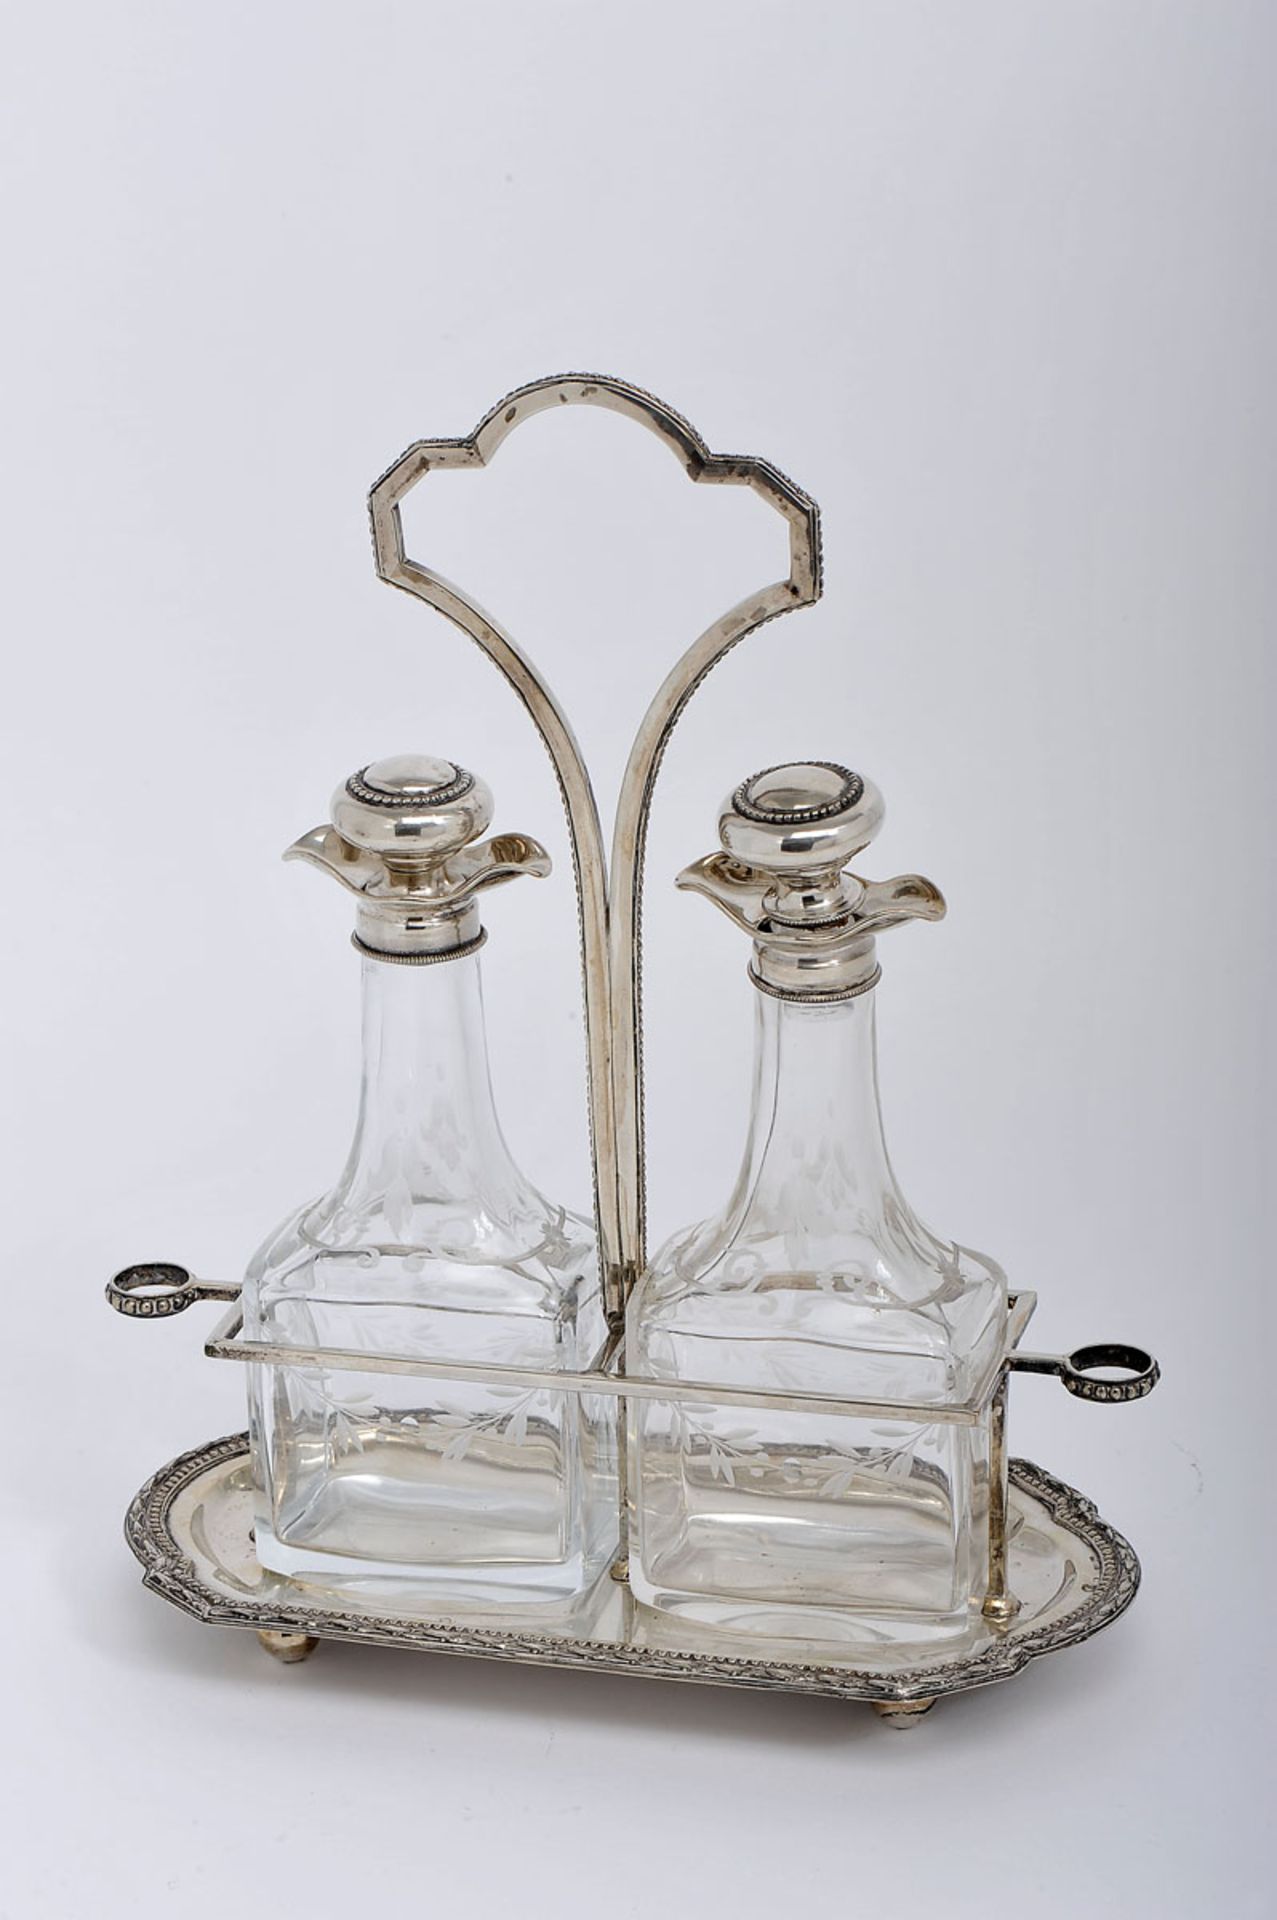 A Cruet, 833/1000 silver, friezes en relief, glass cruets with frosted decoration and silver rims